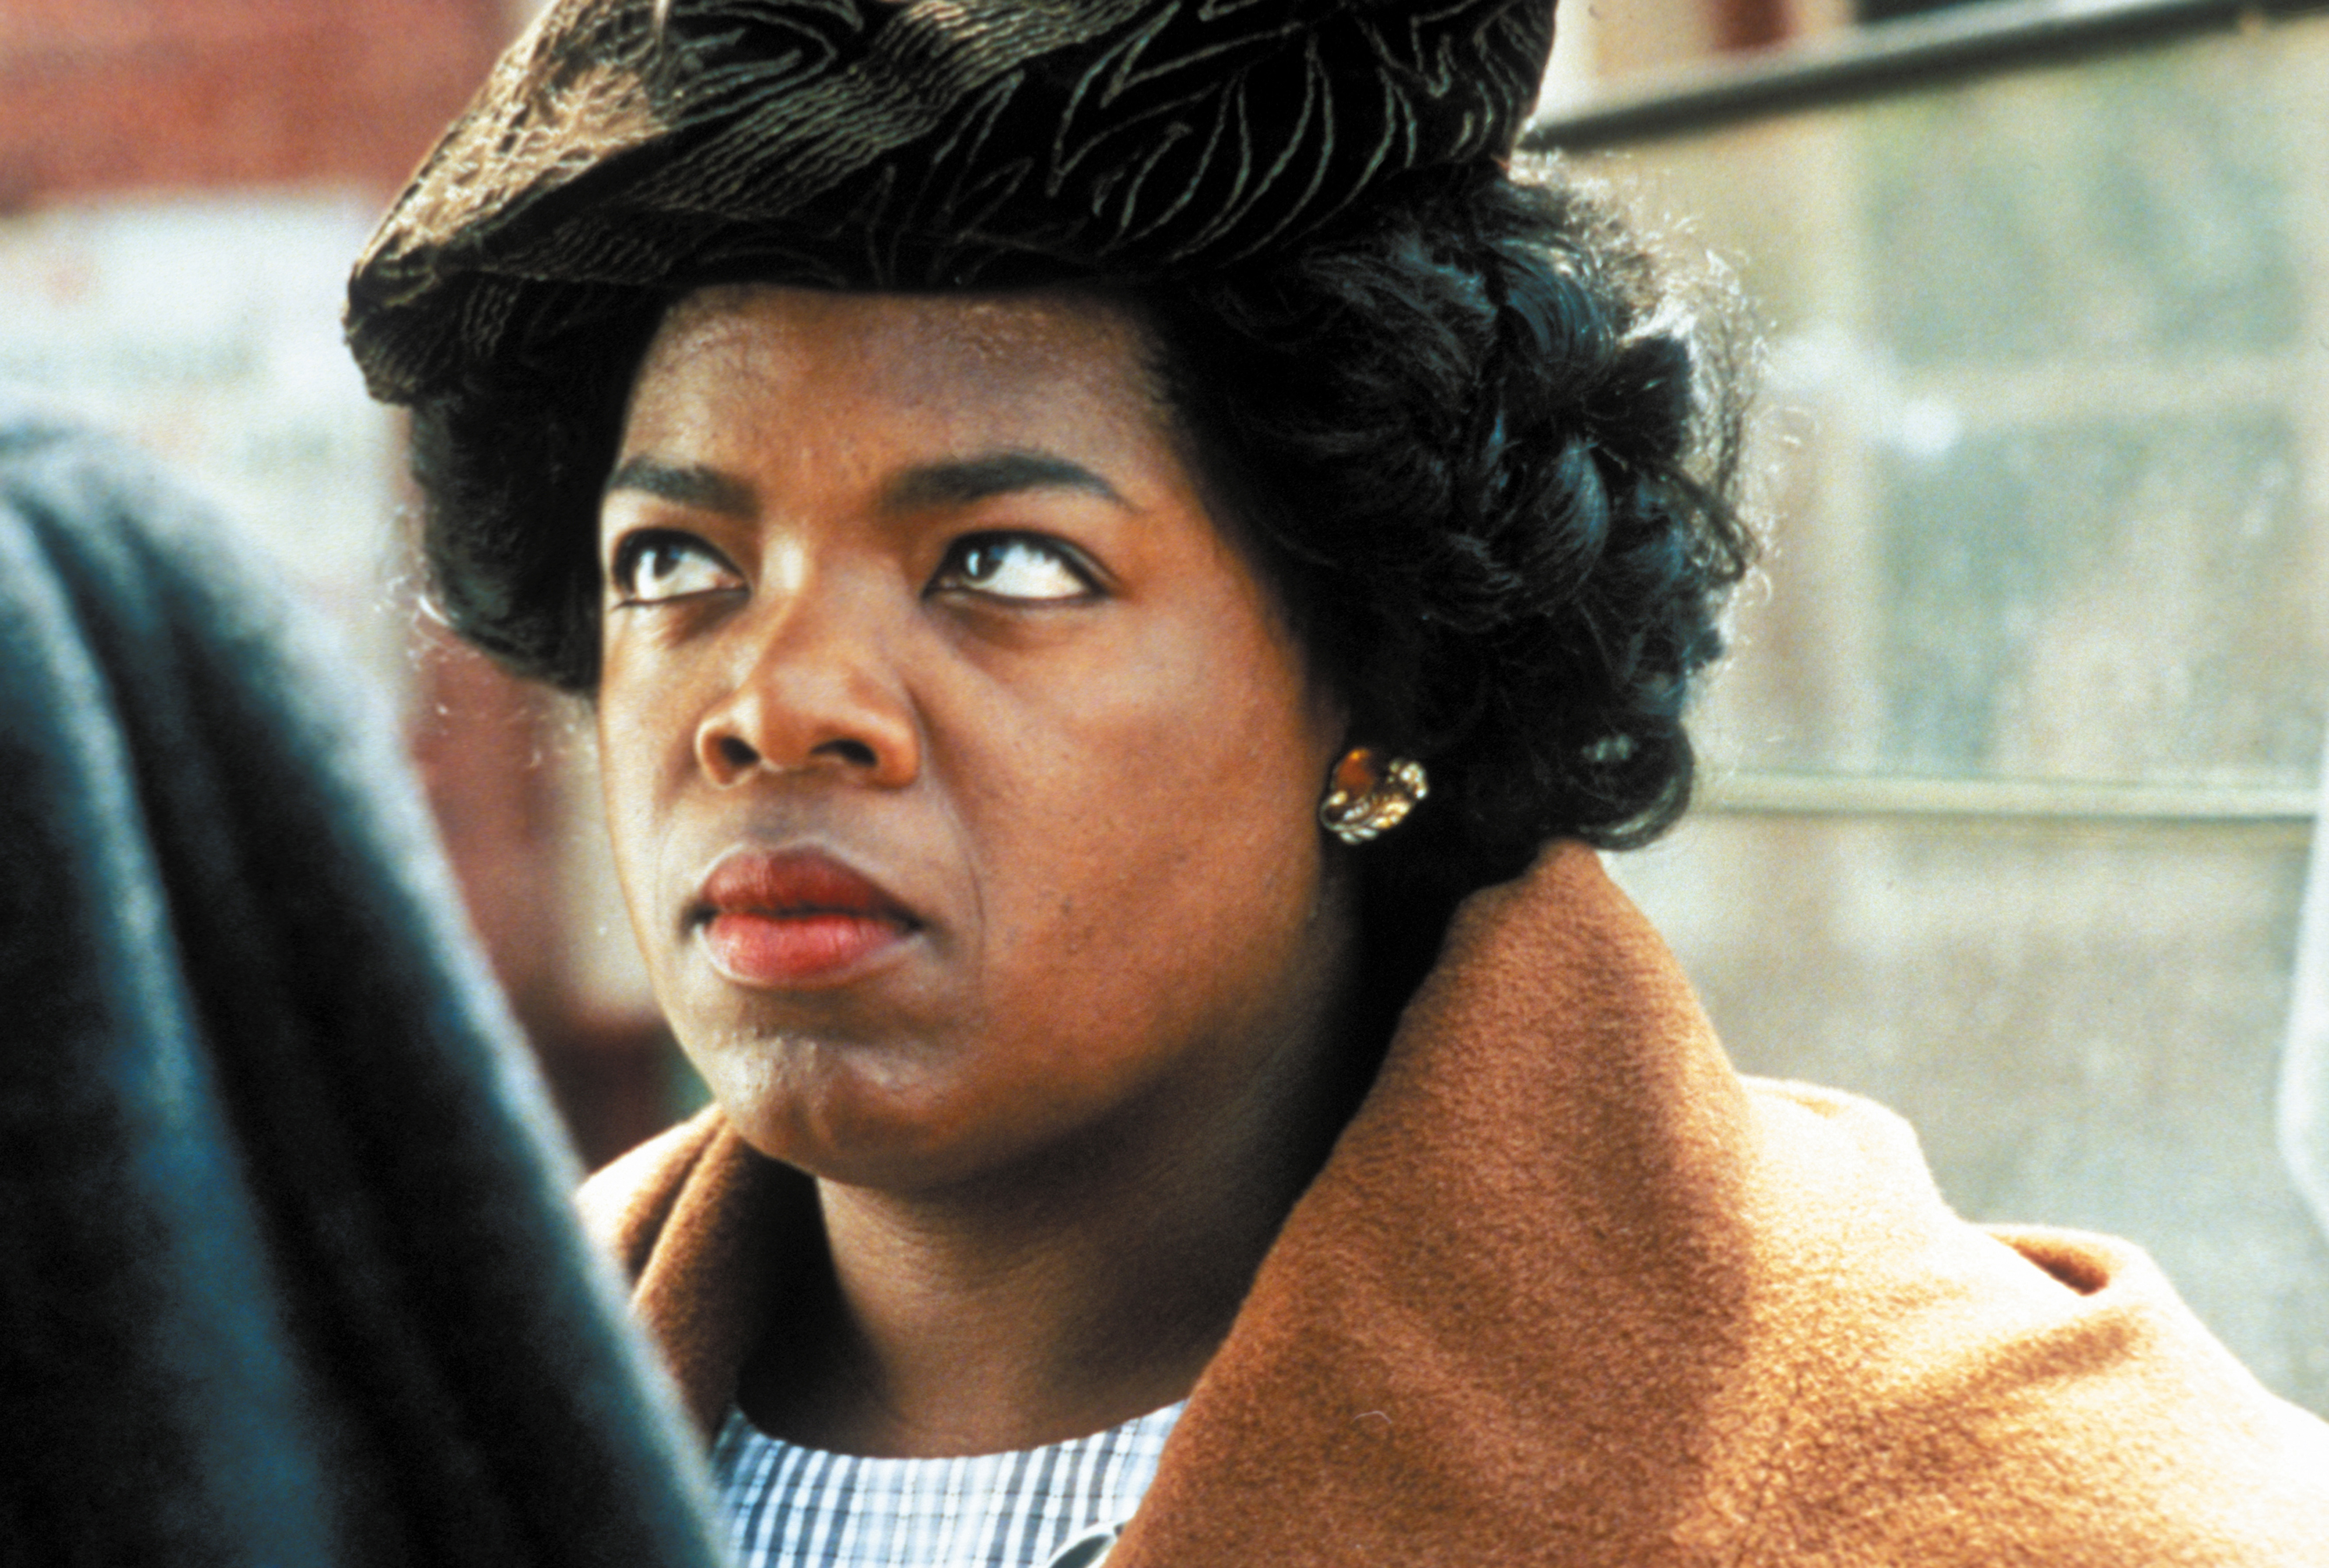 Oprah Winfrey during a scene from "The Color Purple" in 1985 | Source: Getty Images